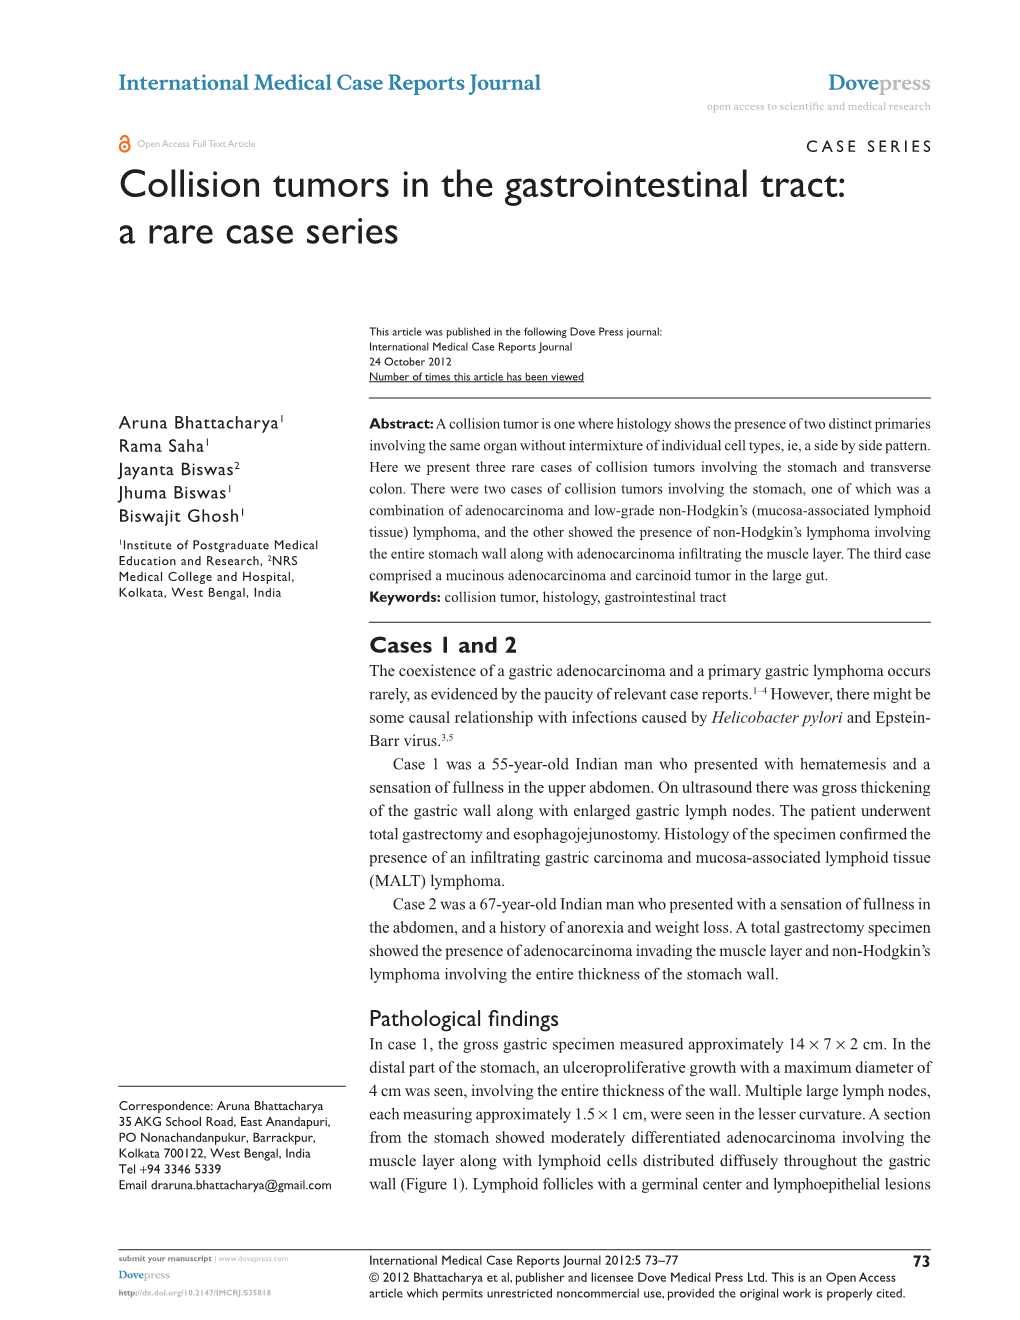 Collision Tumors in the Gastrointestinal Tract: a Rare Case Series